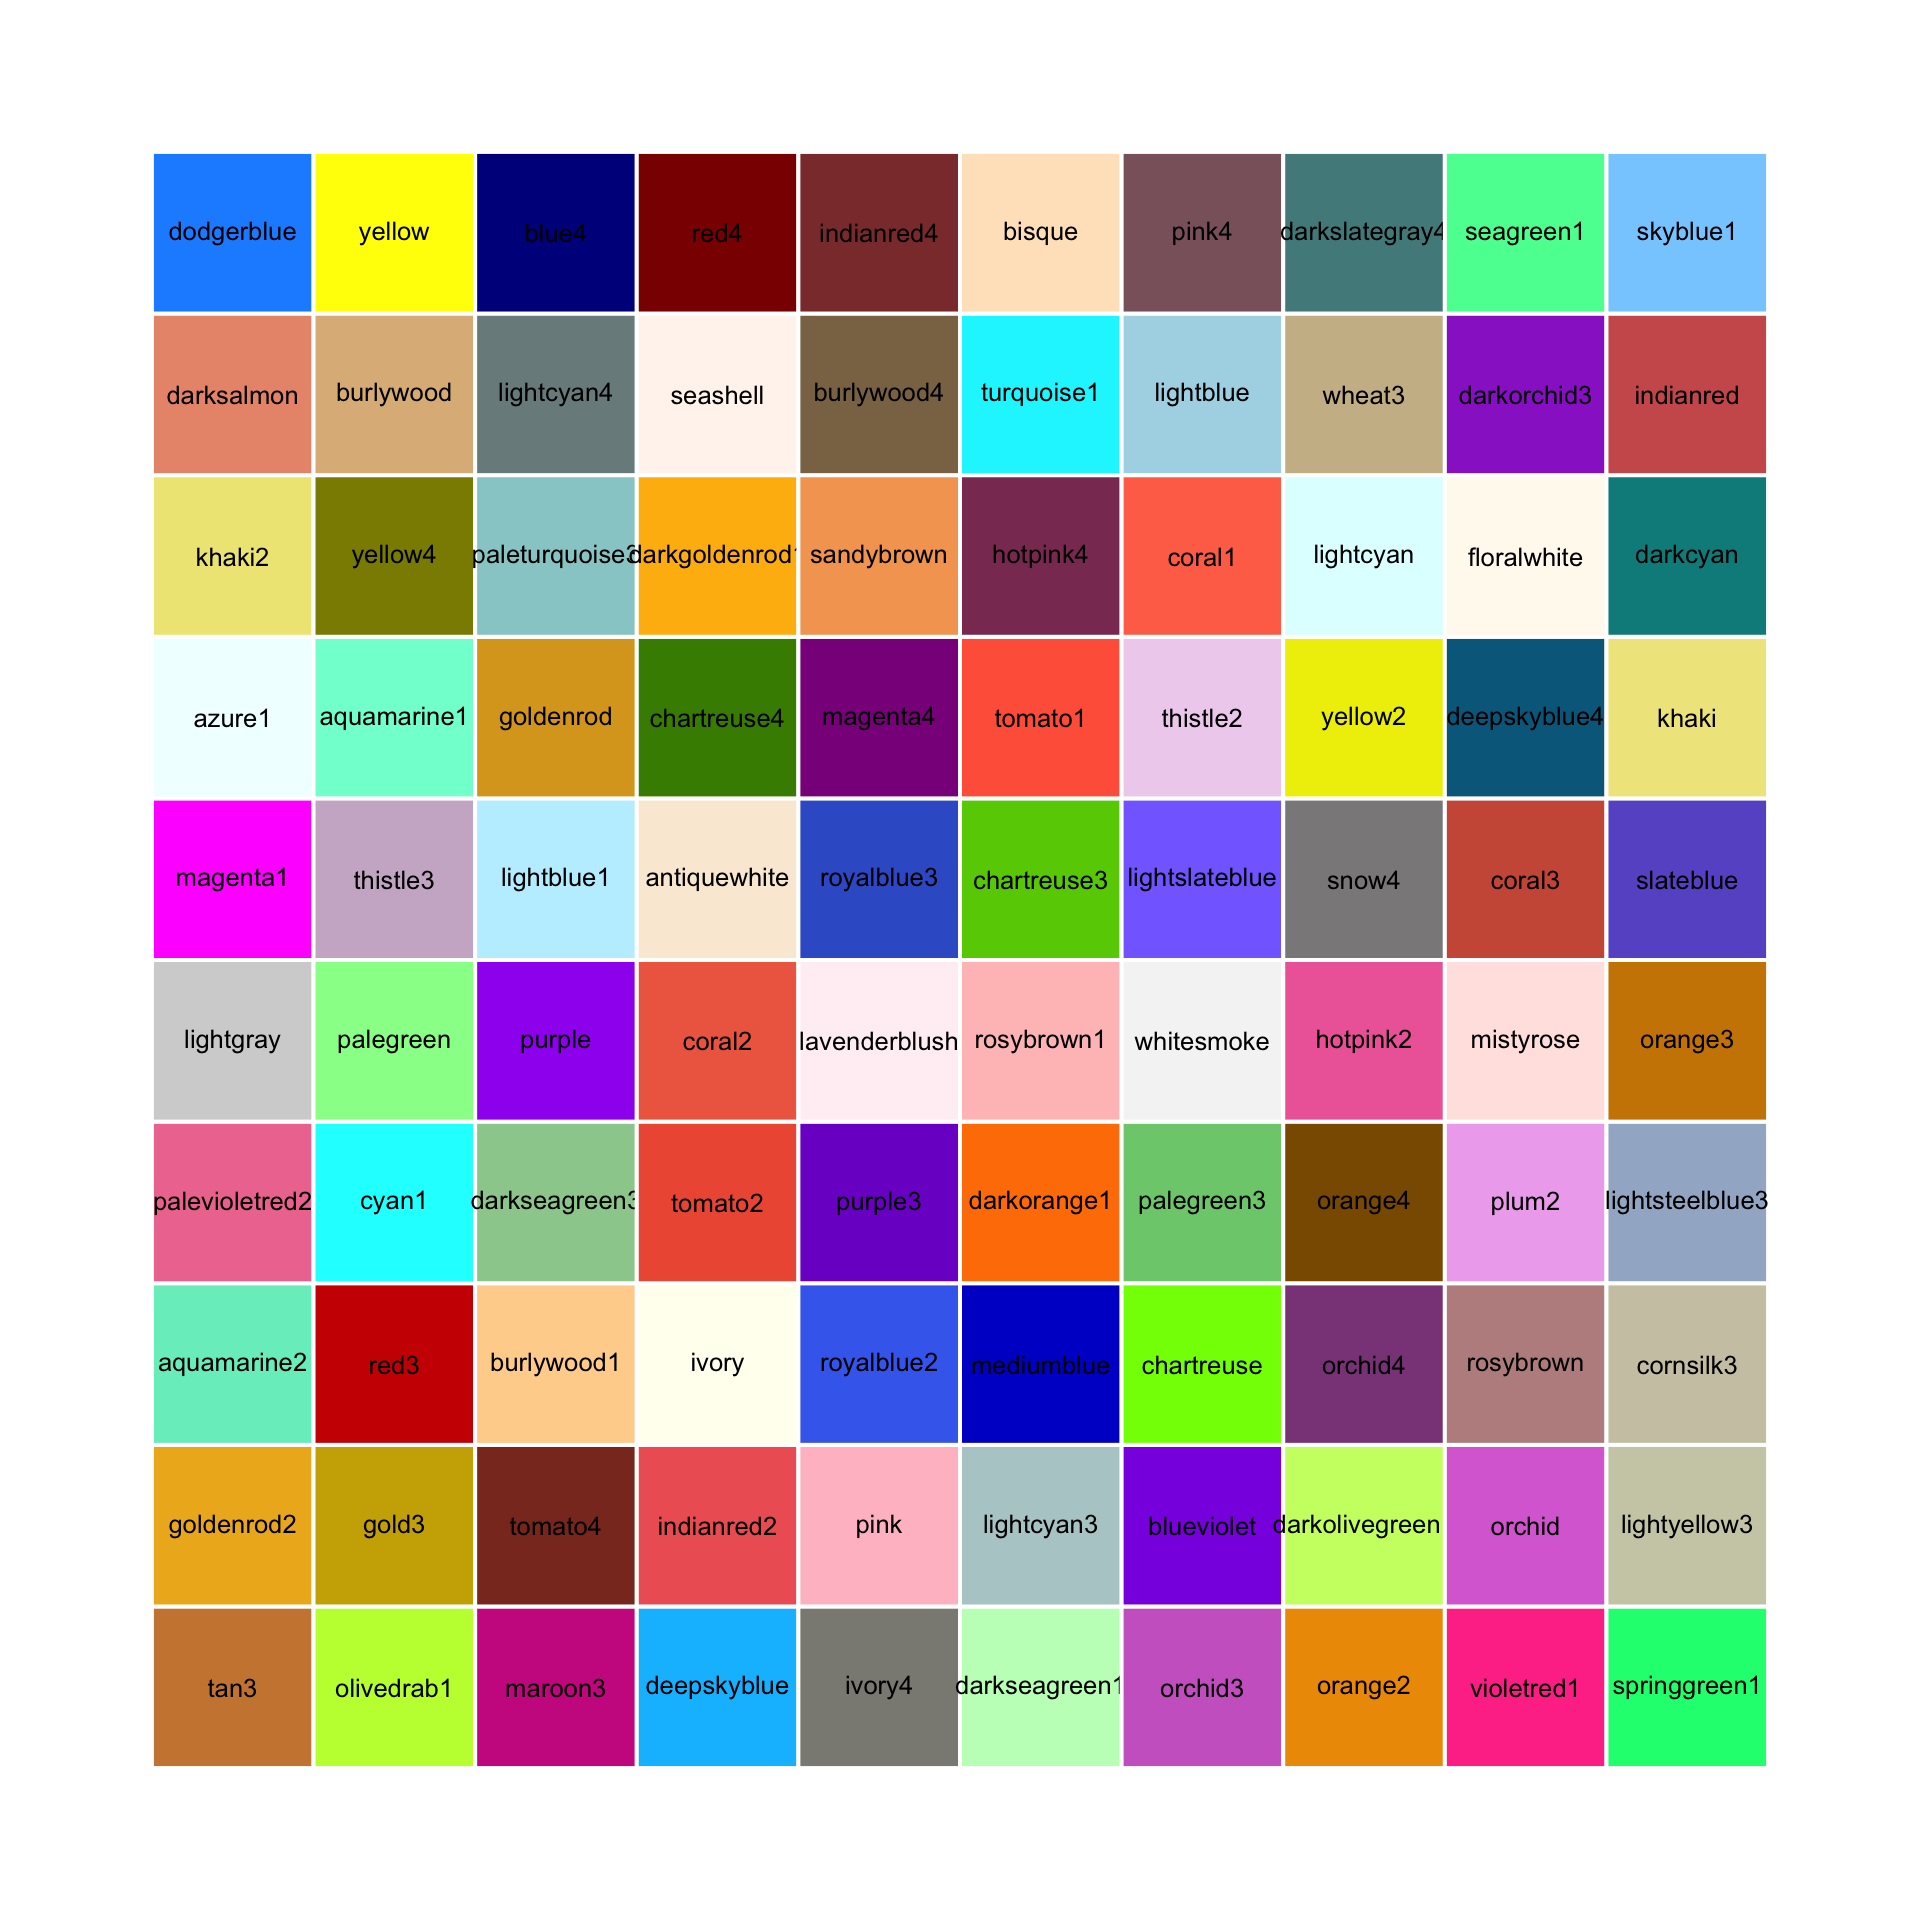 100 random (non-gray) colors and their names in R.